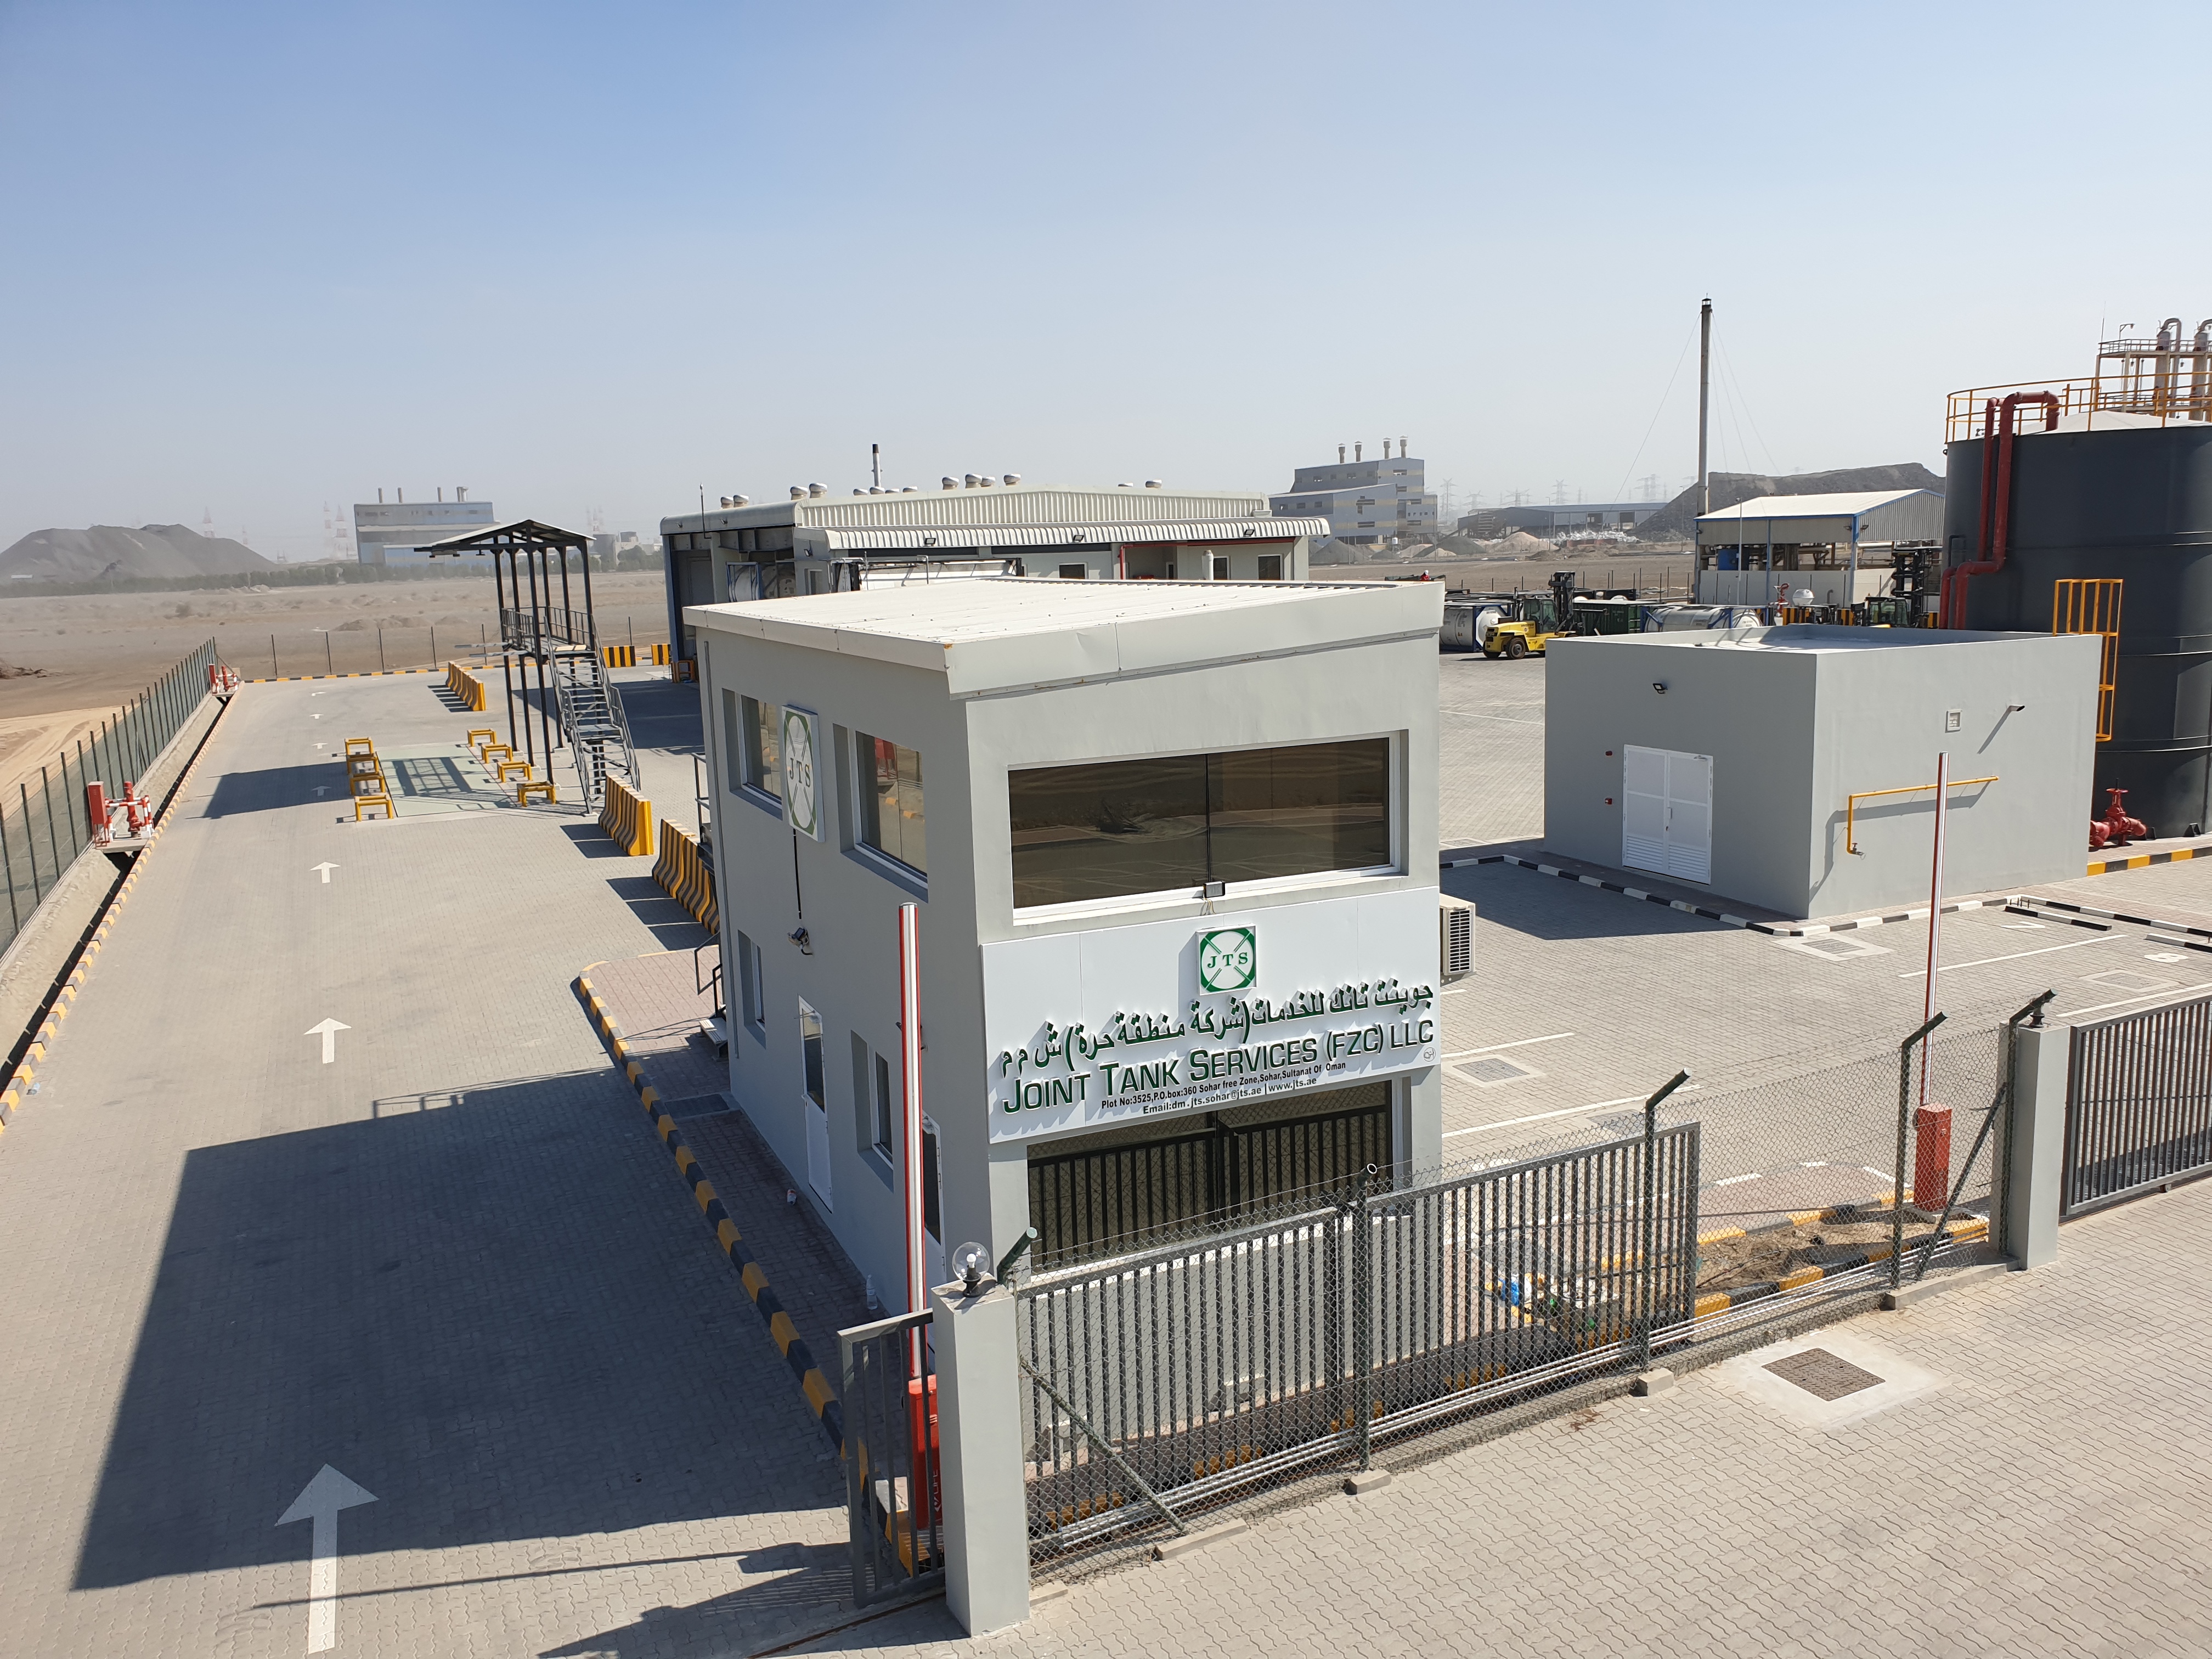 STC depot in Oman Sohar Joint Tank Services